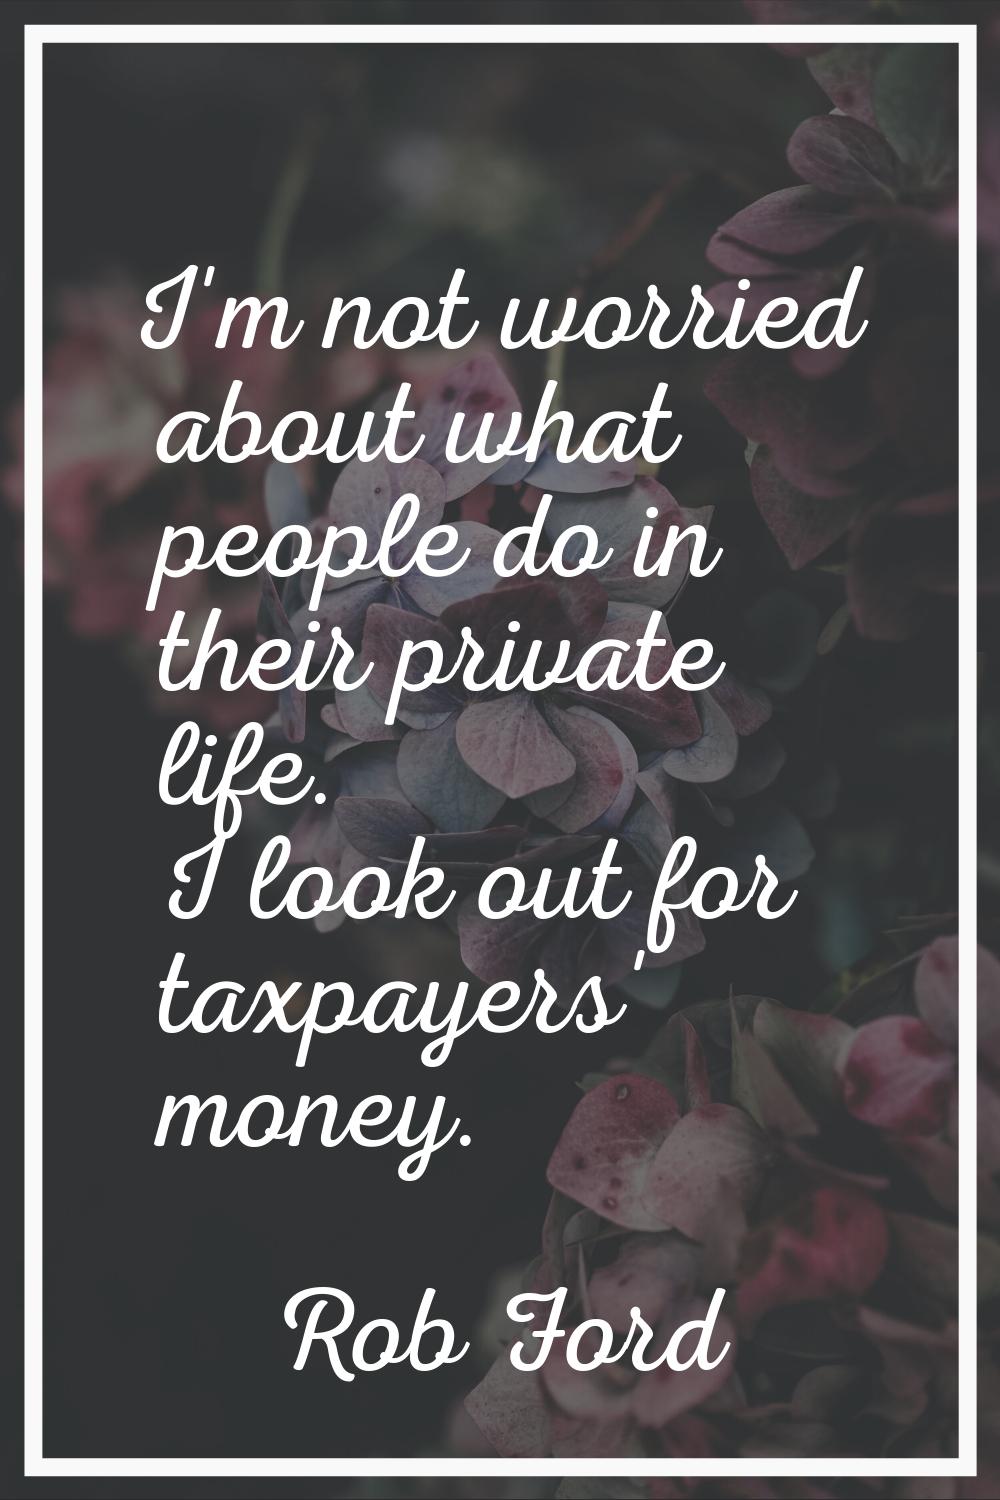 I'm not worried about what people do in their private life. I look out for taxpayers' money.